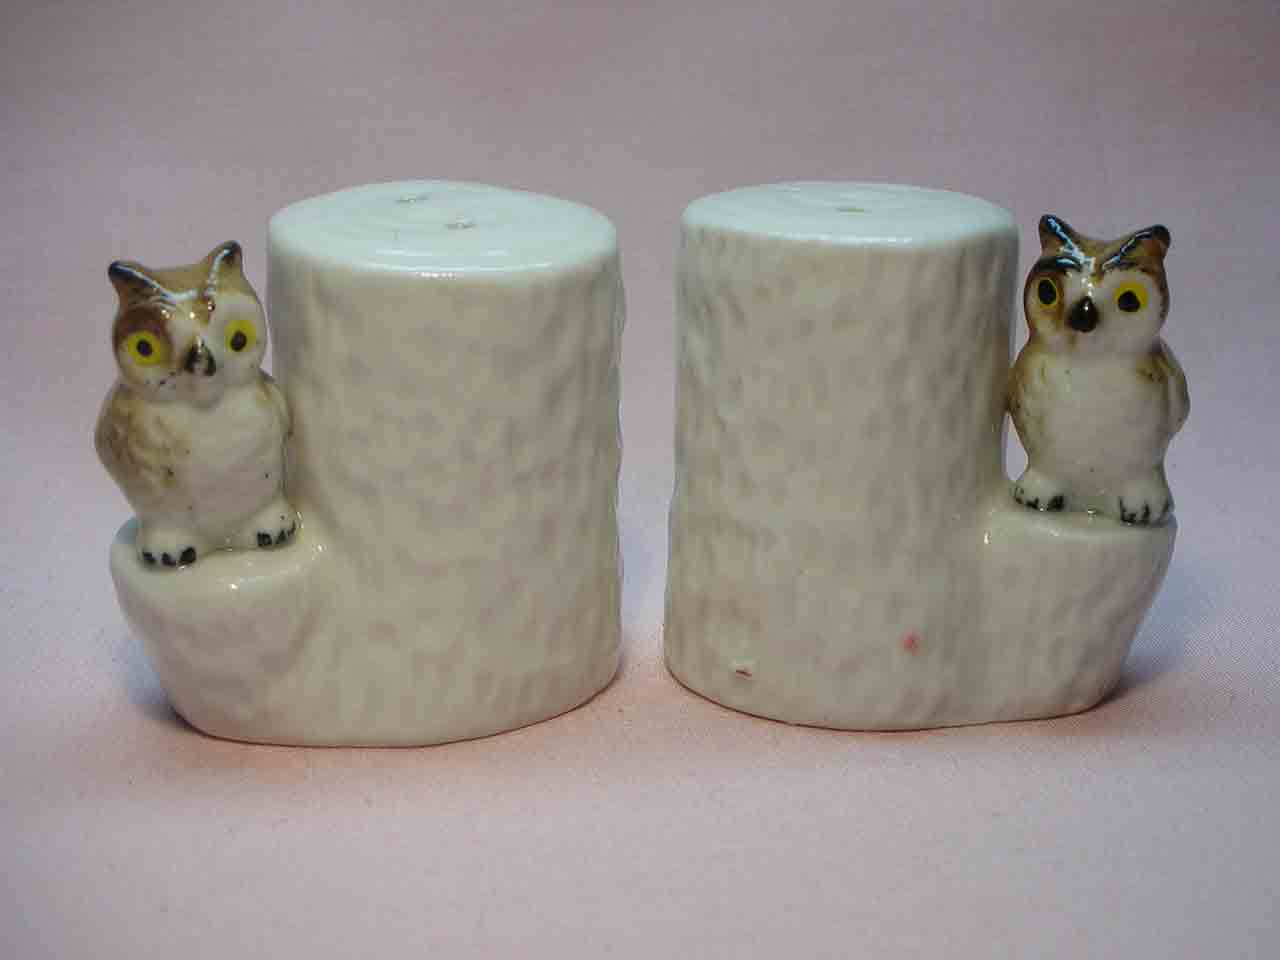 Bone China animals by white tree stumps salt and pepper shakers - owls